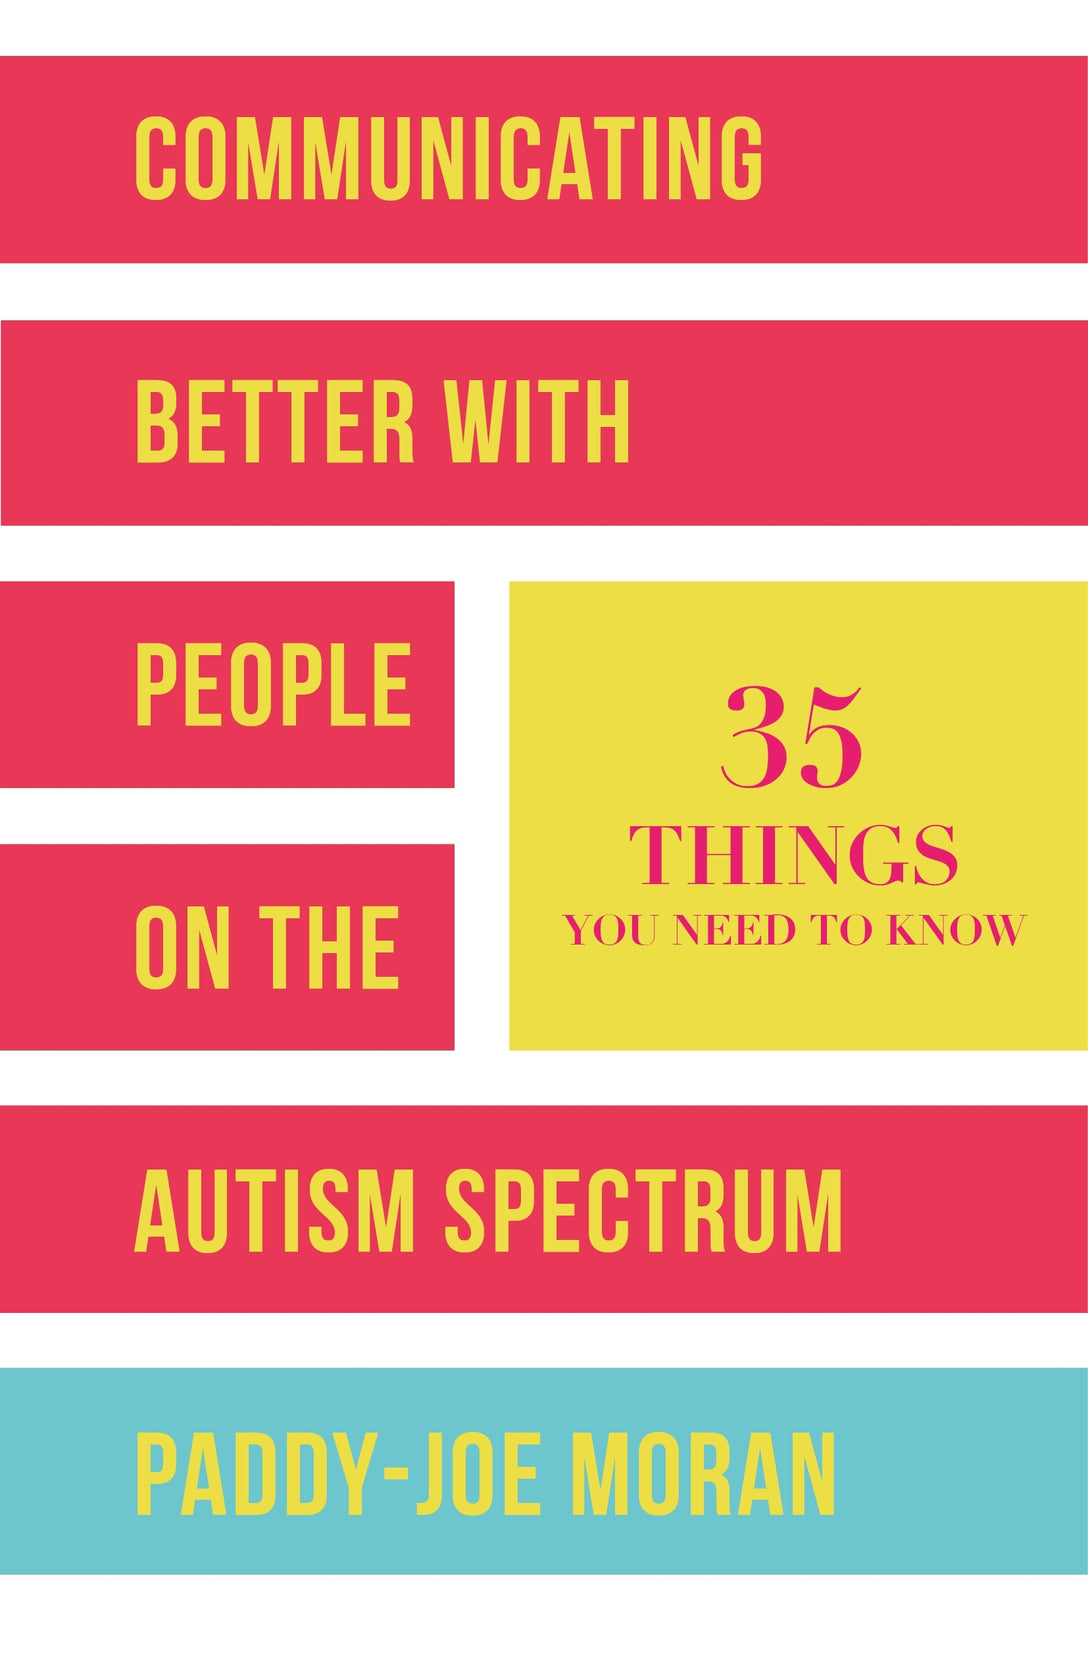 Communicating Better with People on the Autism Spectrum by Paddy-Joe Moran